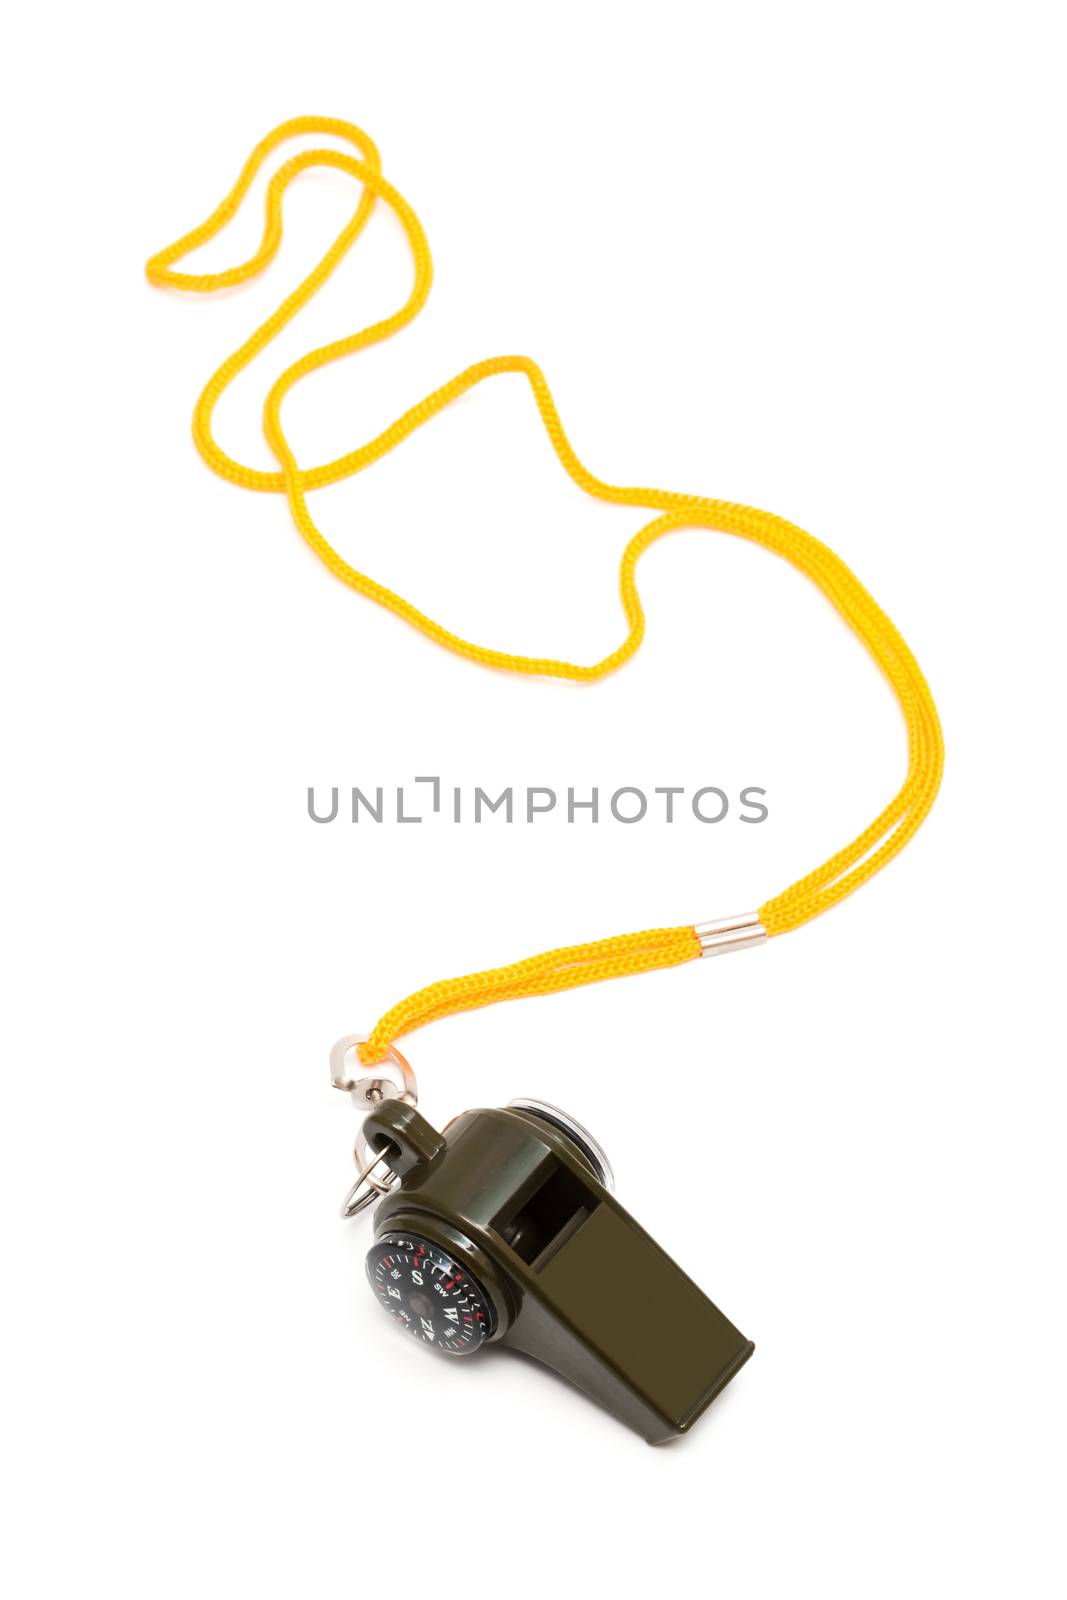 Whistle with a compass by terex